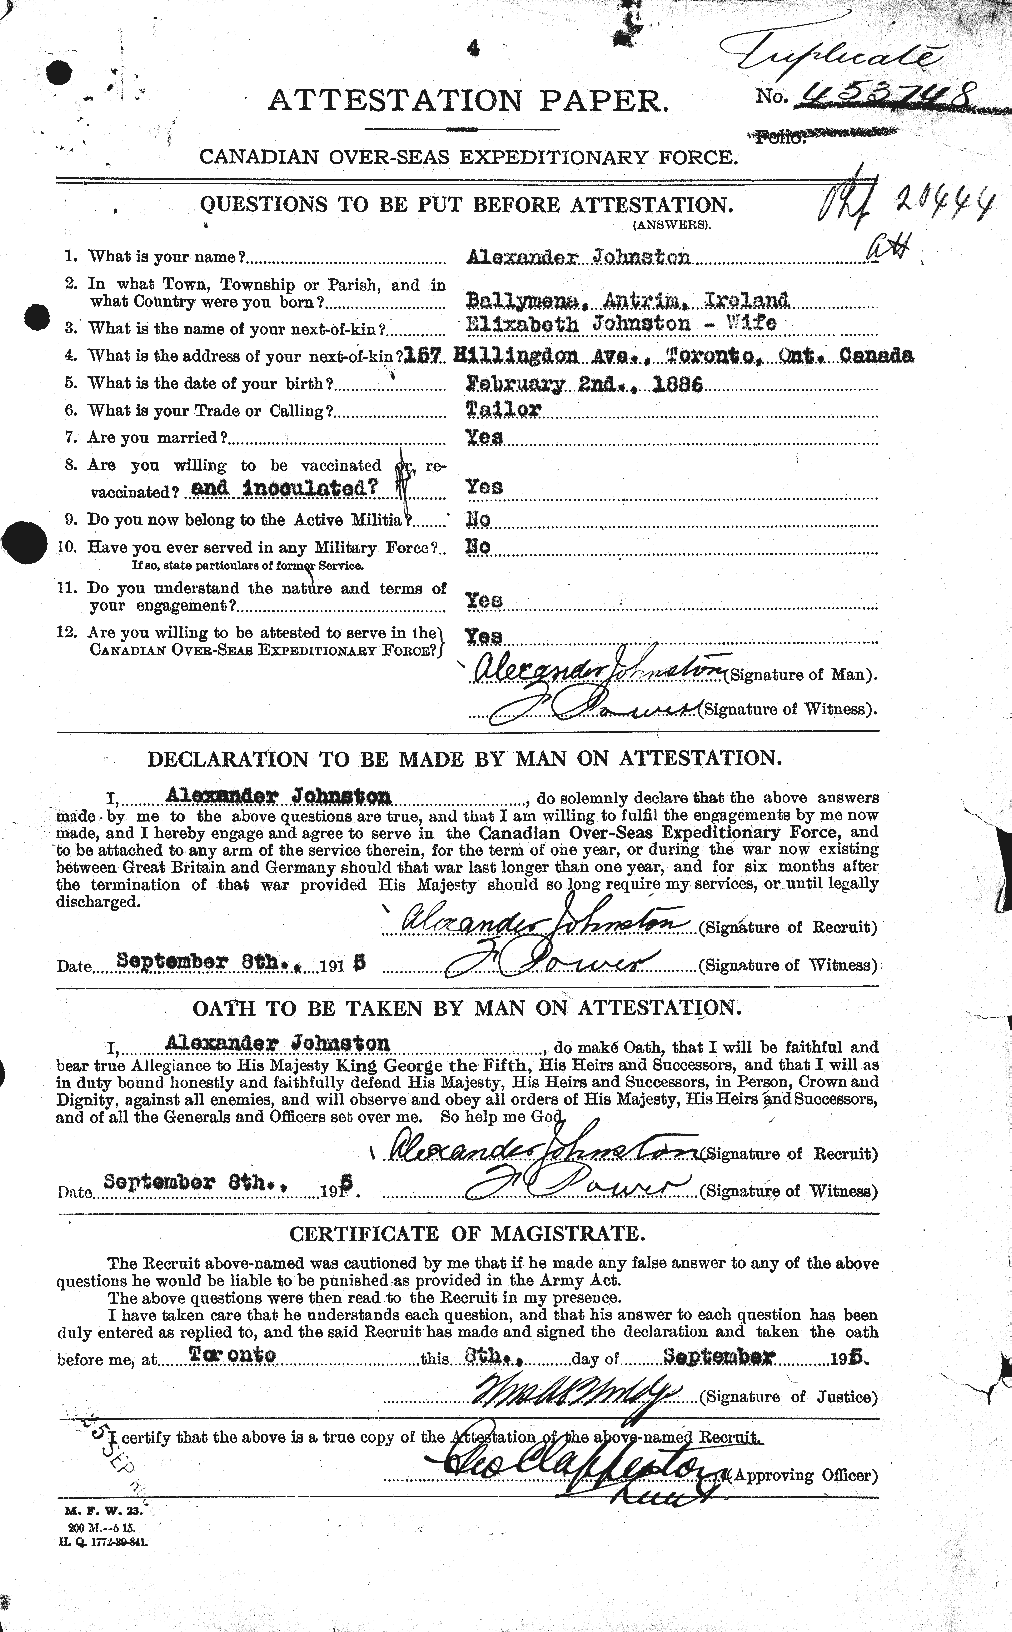 Personnel Records of the First World War - CEF 420960a